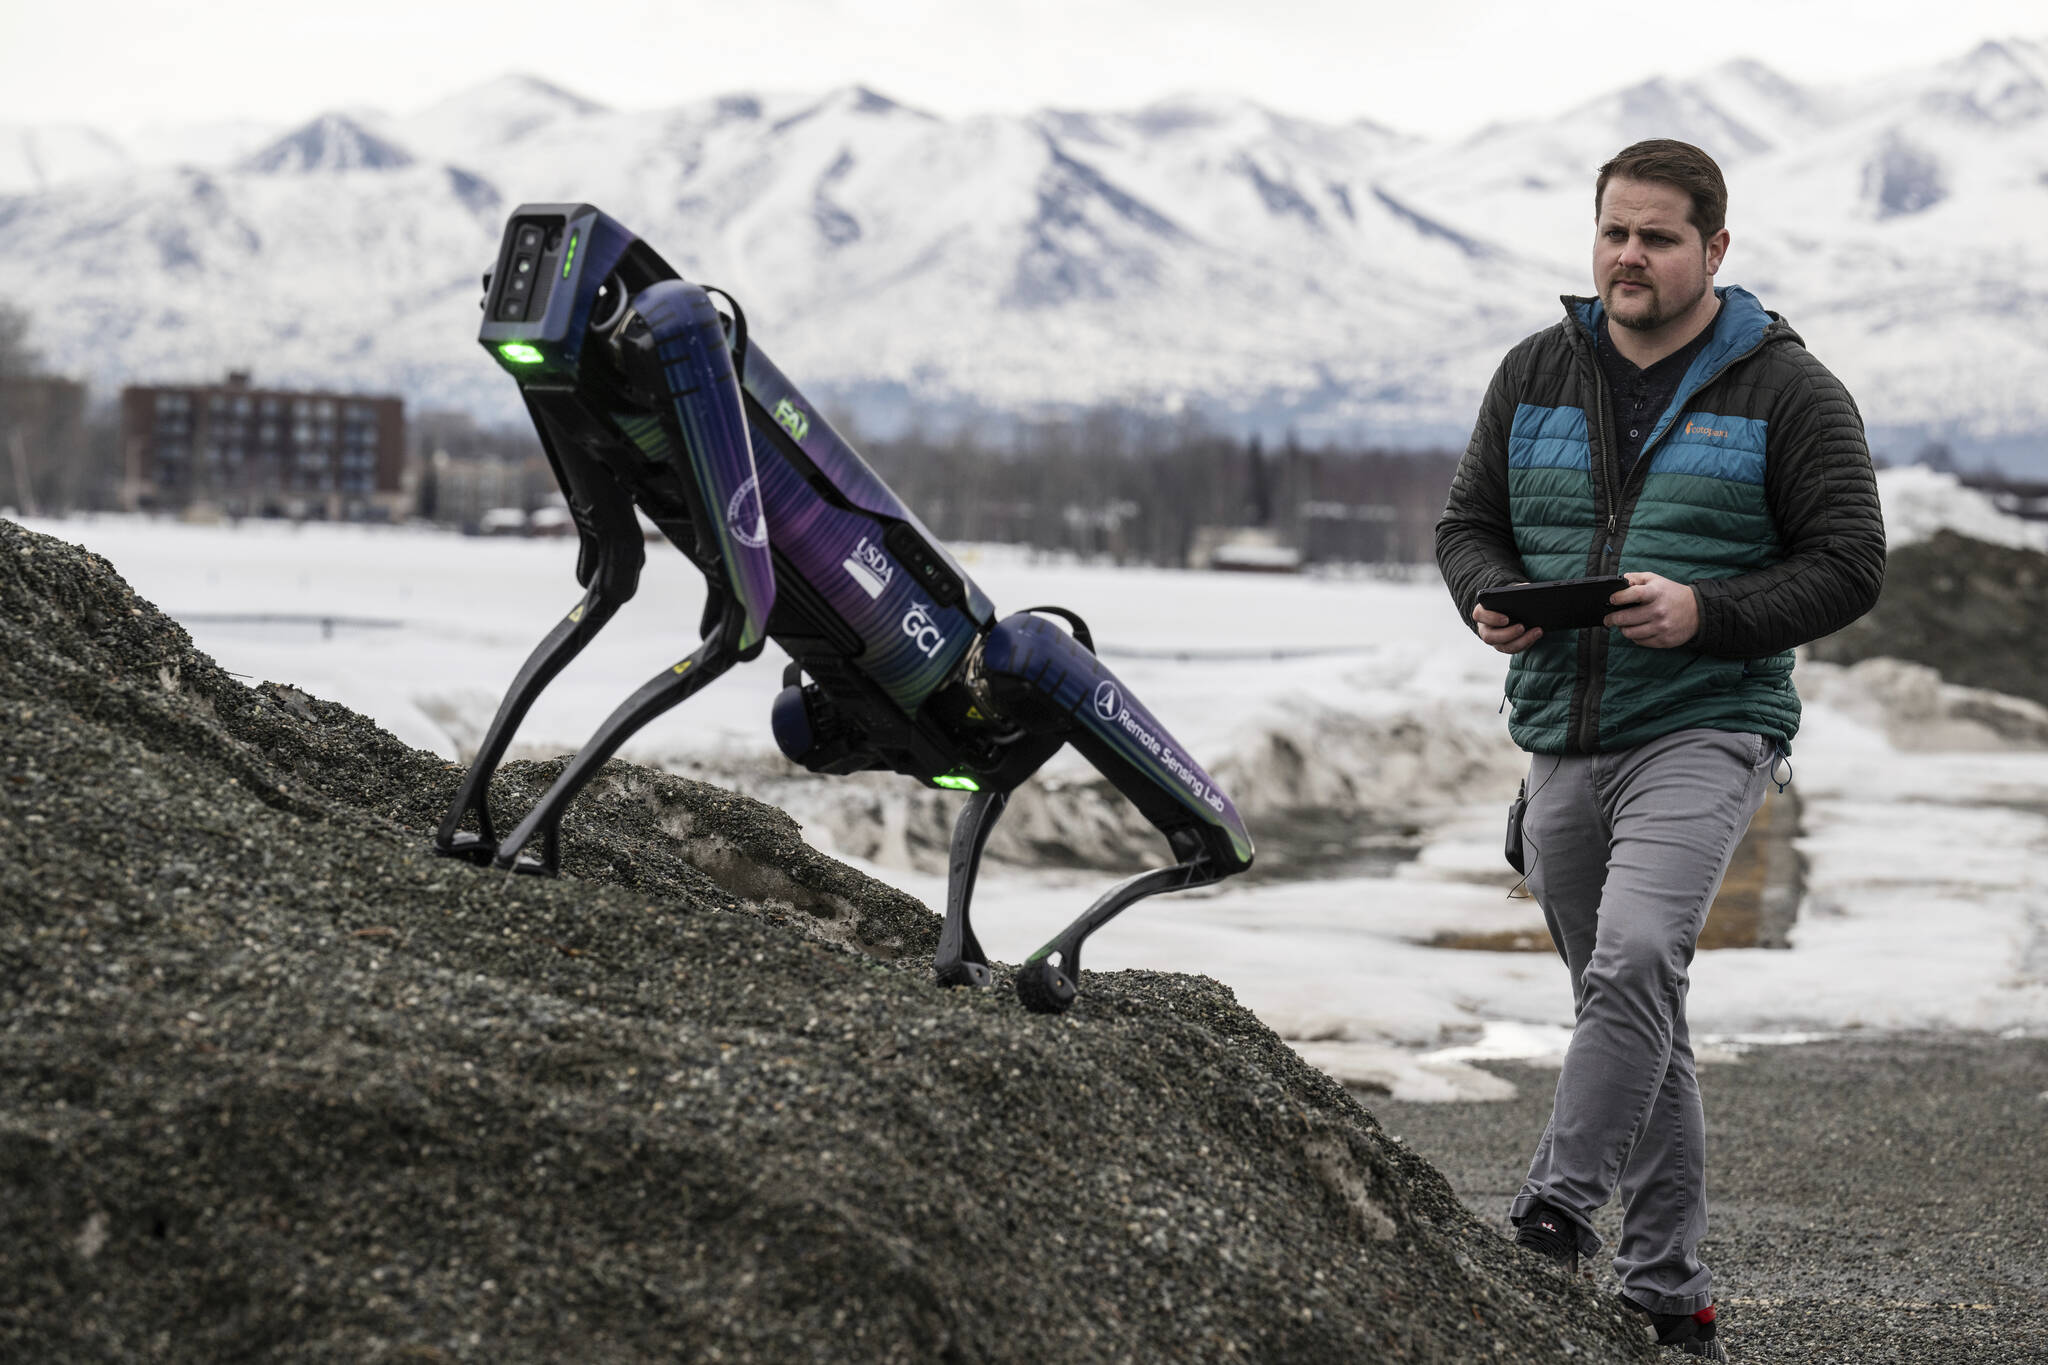 Alaska Department of Transportation program manager Ryan Marlow demonstrates the agency’s robotic dog in Anchorage on March 26. The device will be camouflaged as a coyote or fox to ward off migratory birds and other wildlife at Alaska’s second-largest airport, the DOT said. (Marc Lester/Anchorage Daily News via AP)